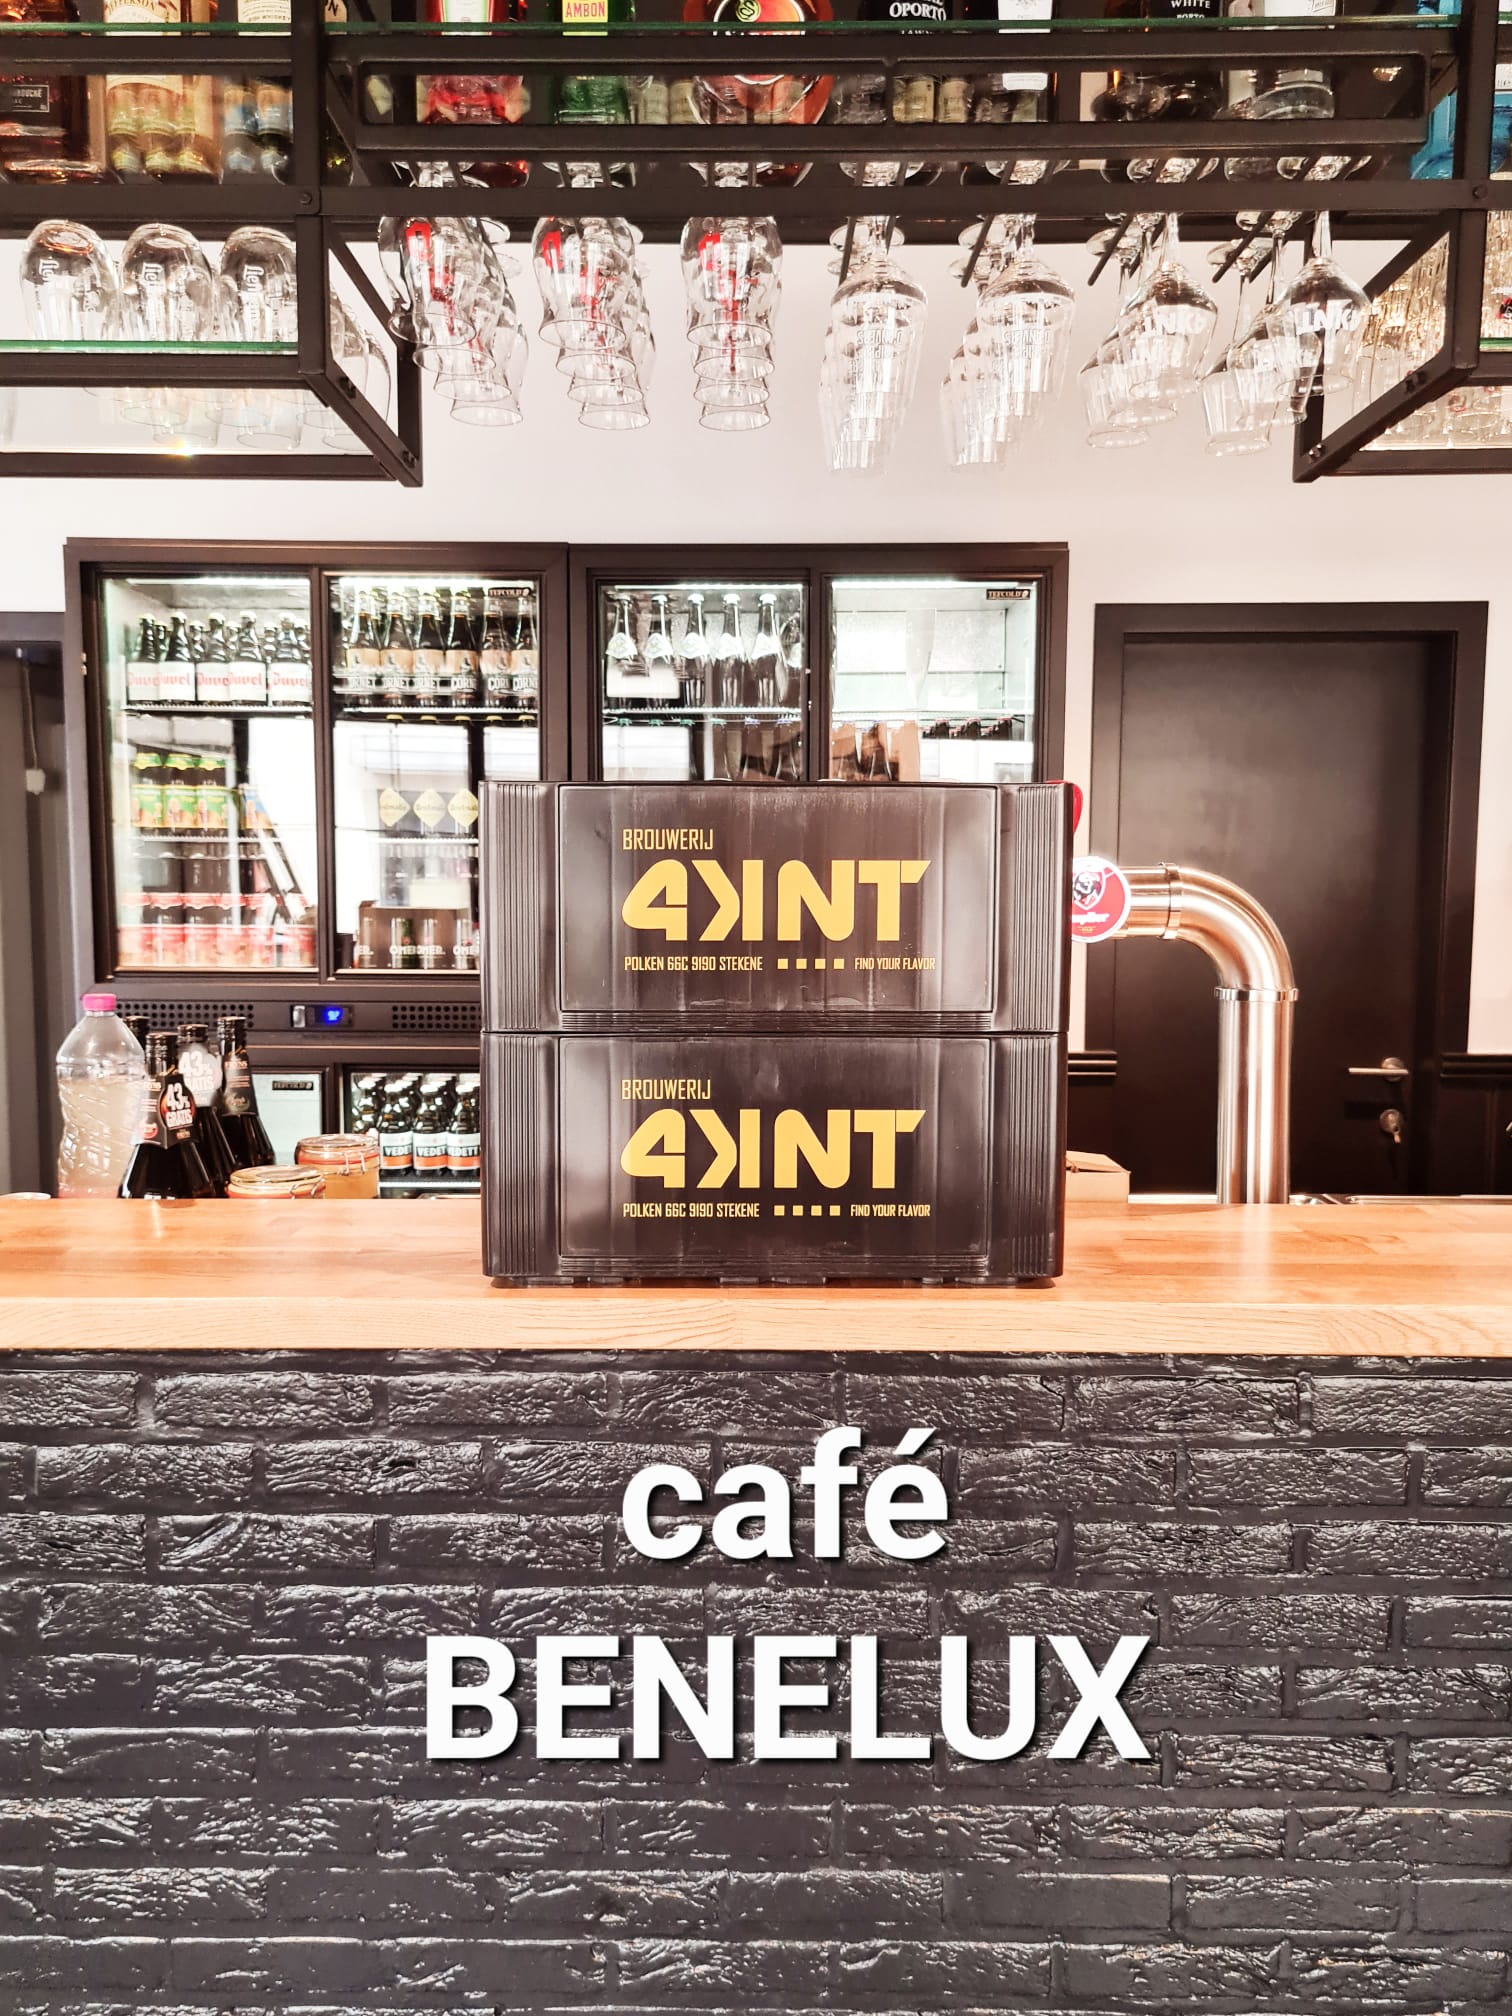 4knt in cafe benelux